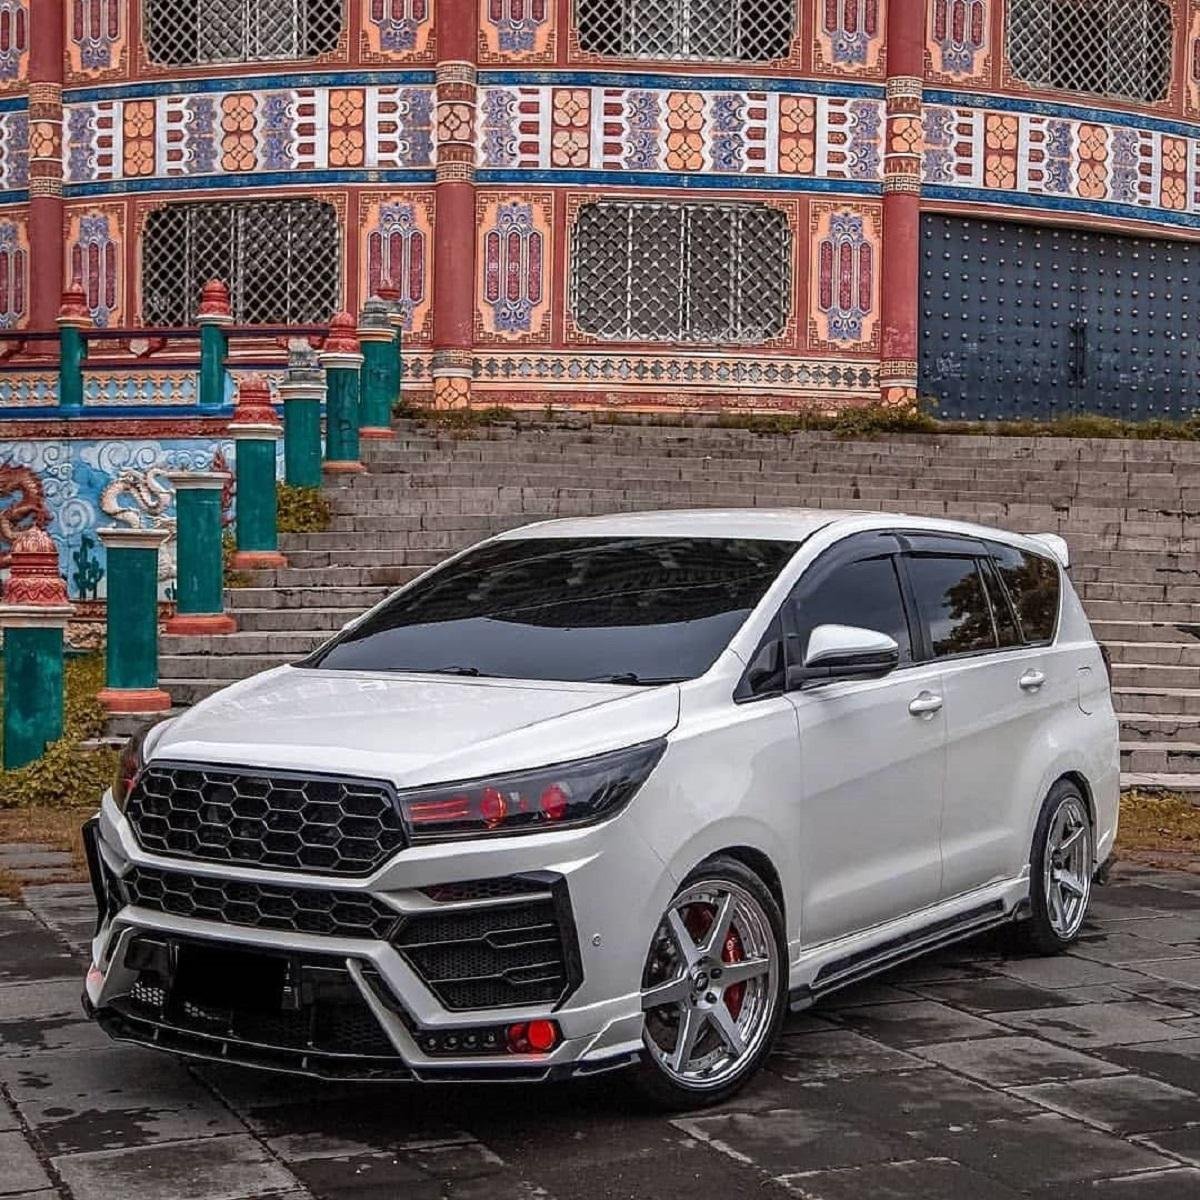 Innova Crysta With Lamborghini Urus Inspired Body Kit And Lowered Ride Height Looks Mean 